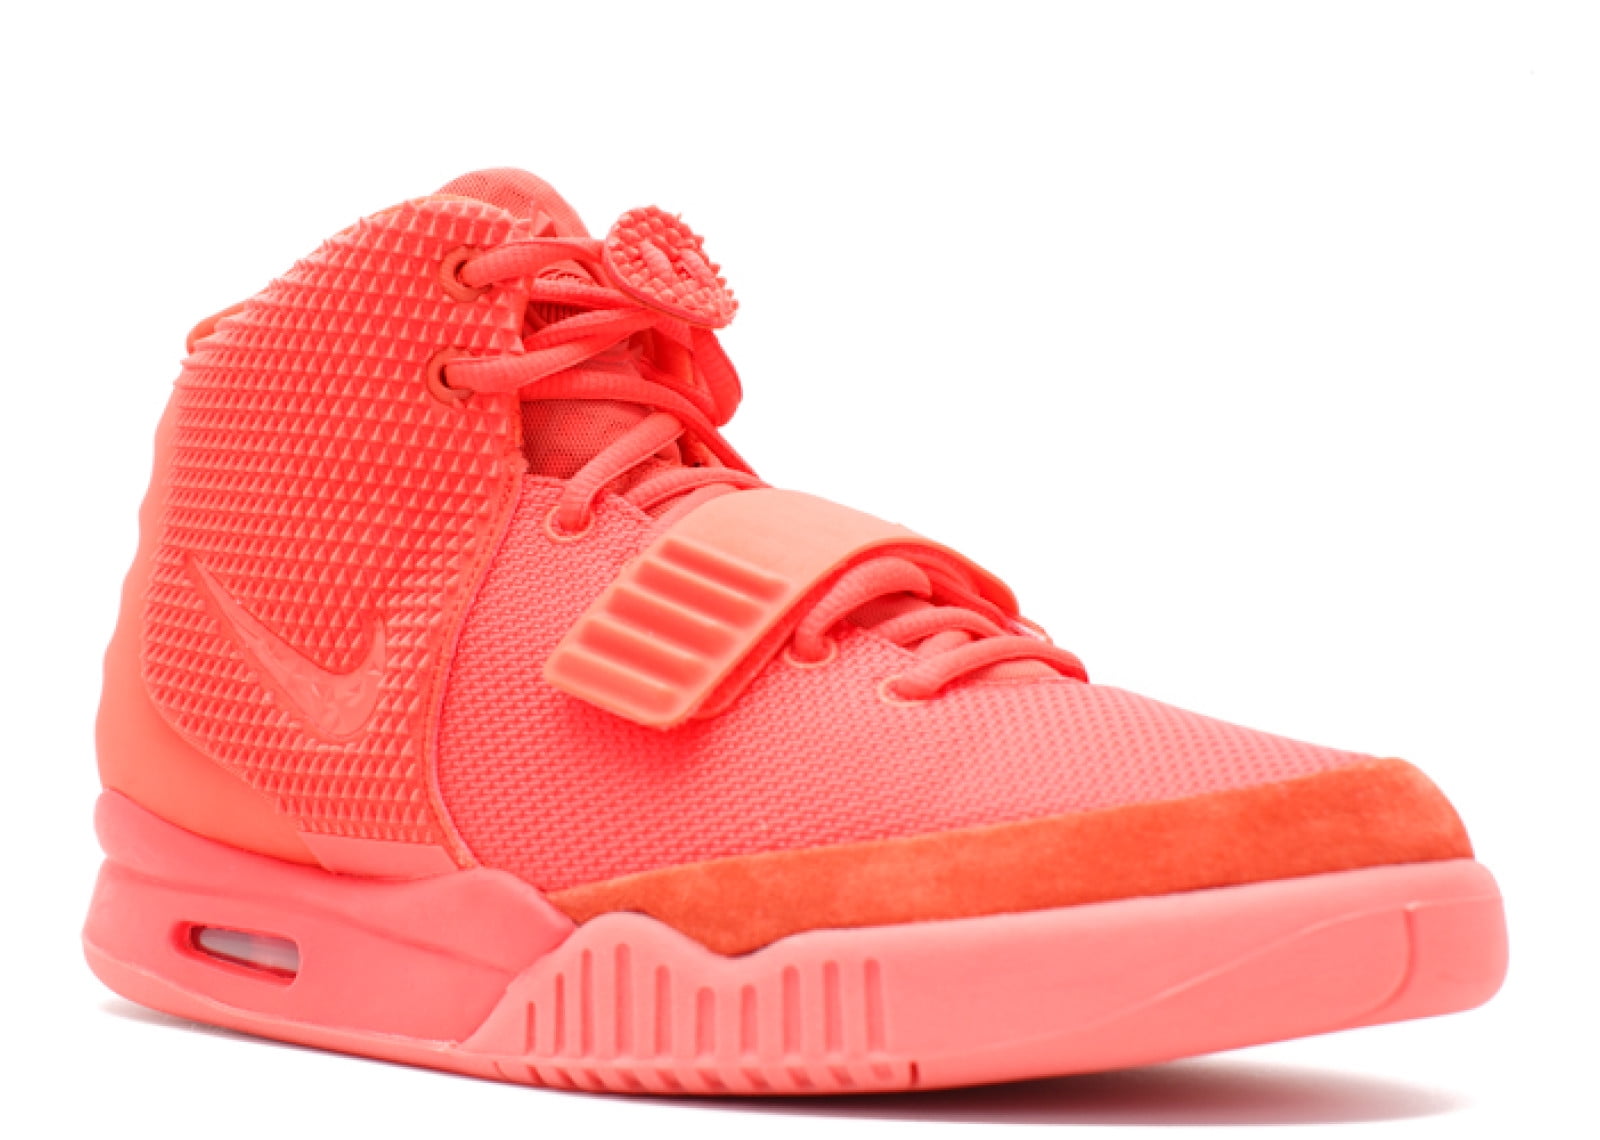 AIR YEEZY 2 SP 'RED OCTOBER' - 508214 